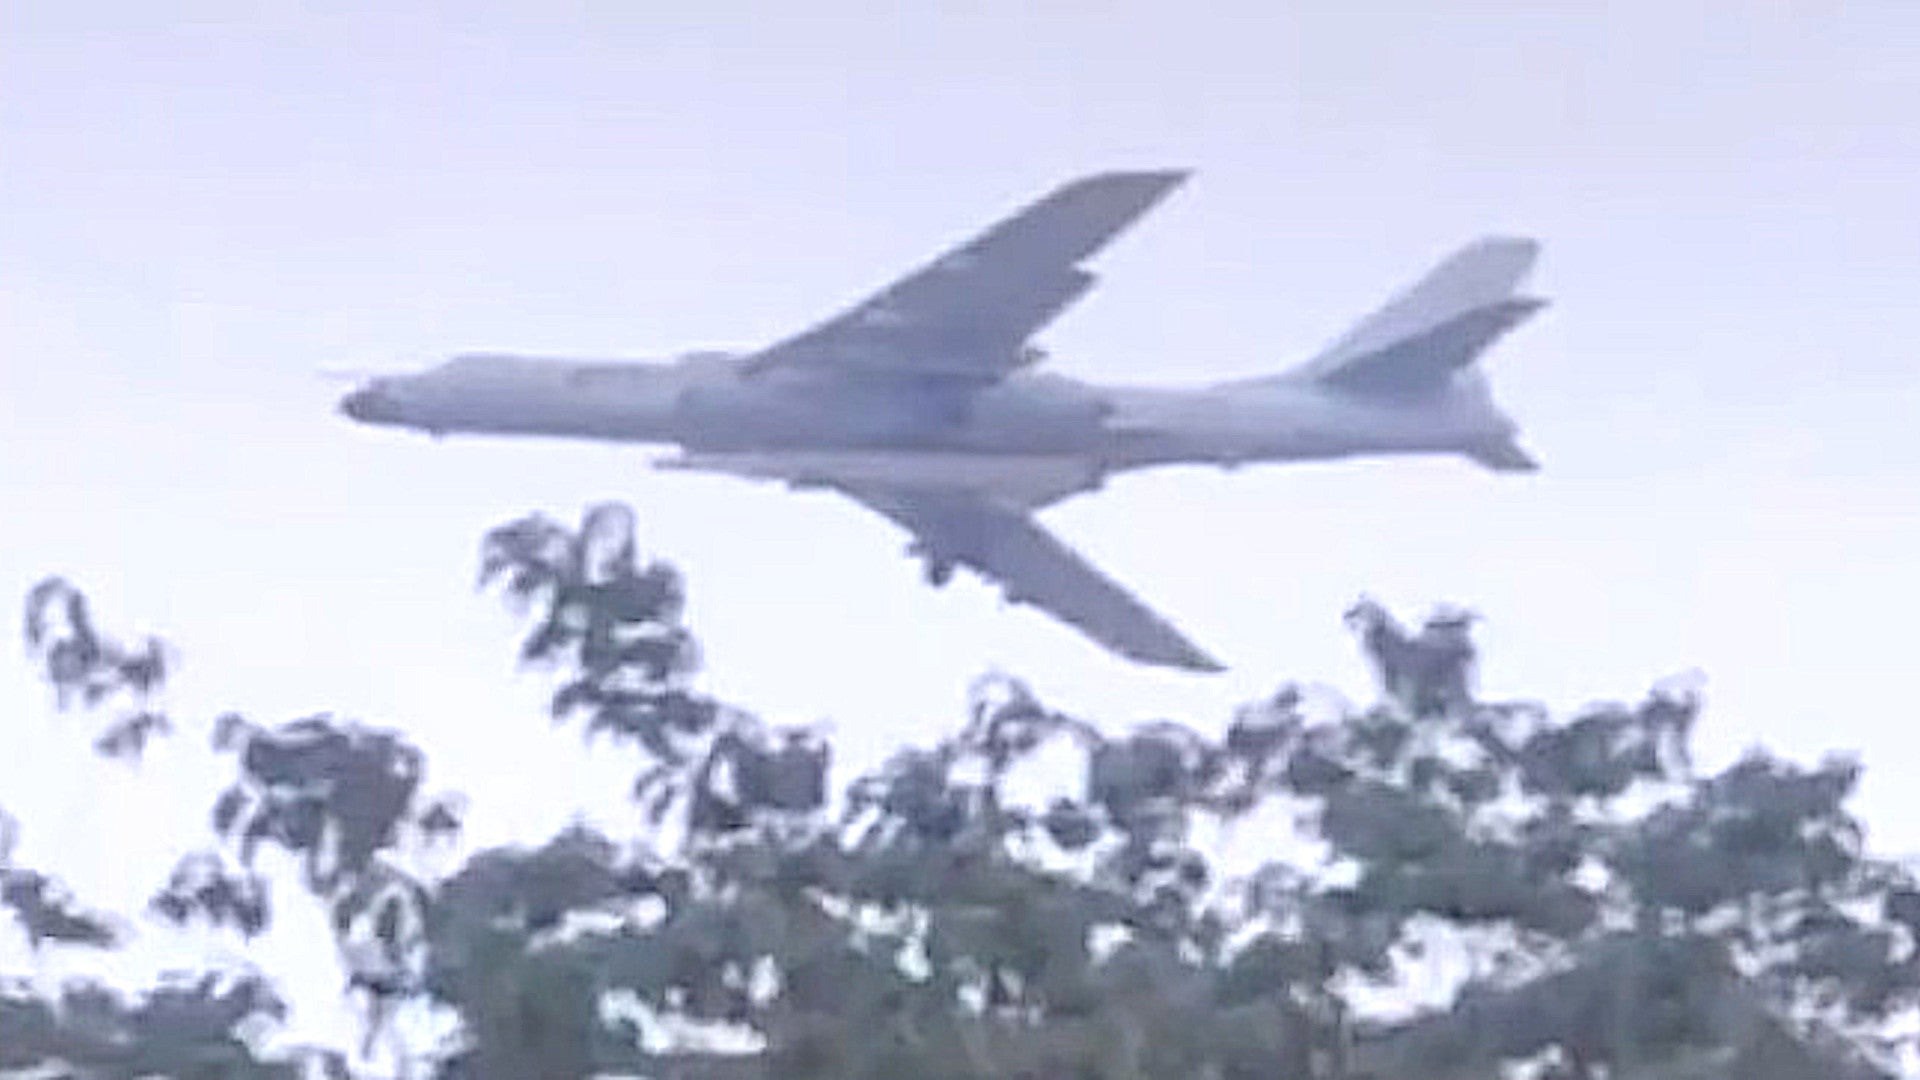 New Images Of Chinese Bomber Carrying Huge Mystery Missile Point To Hypersonic Capability